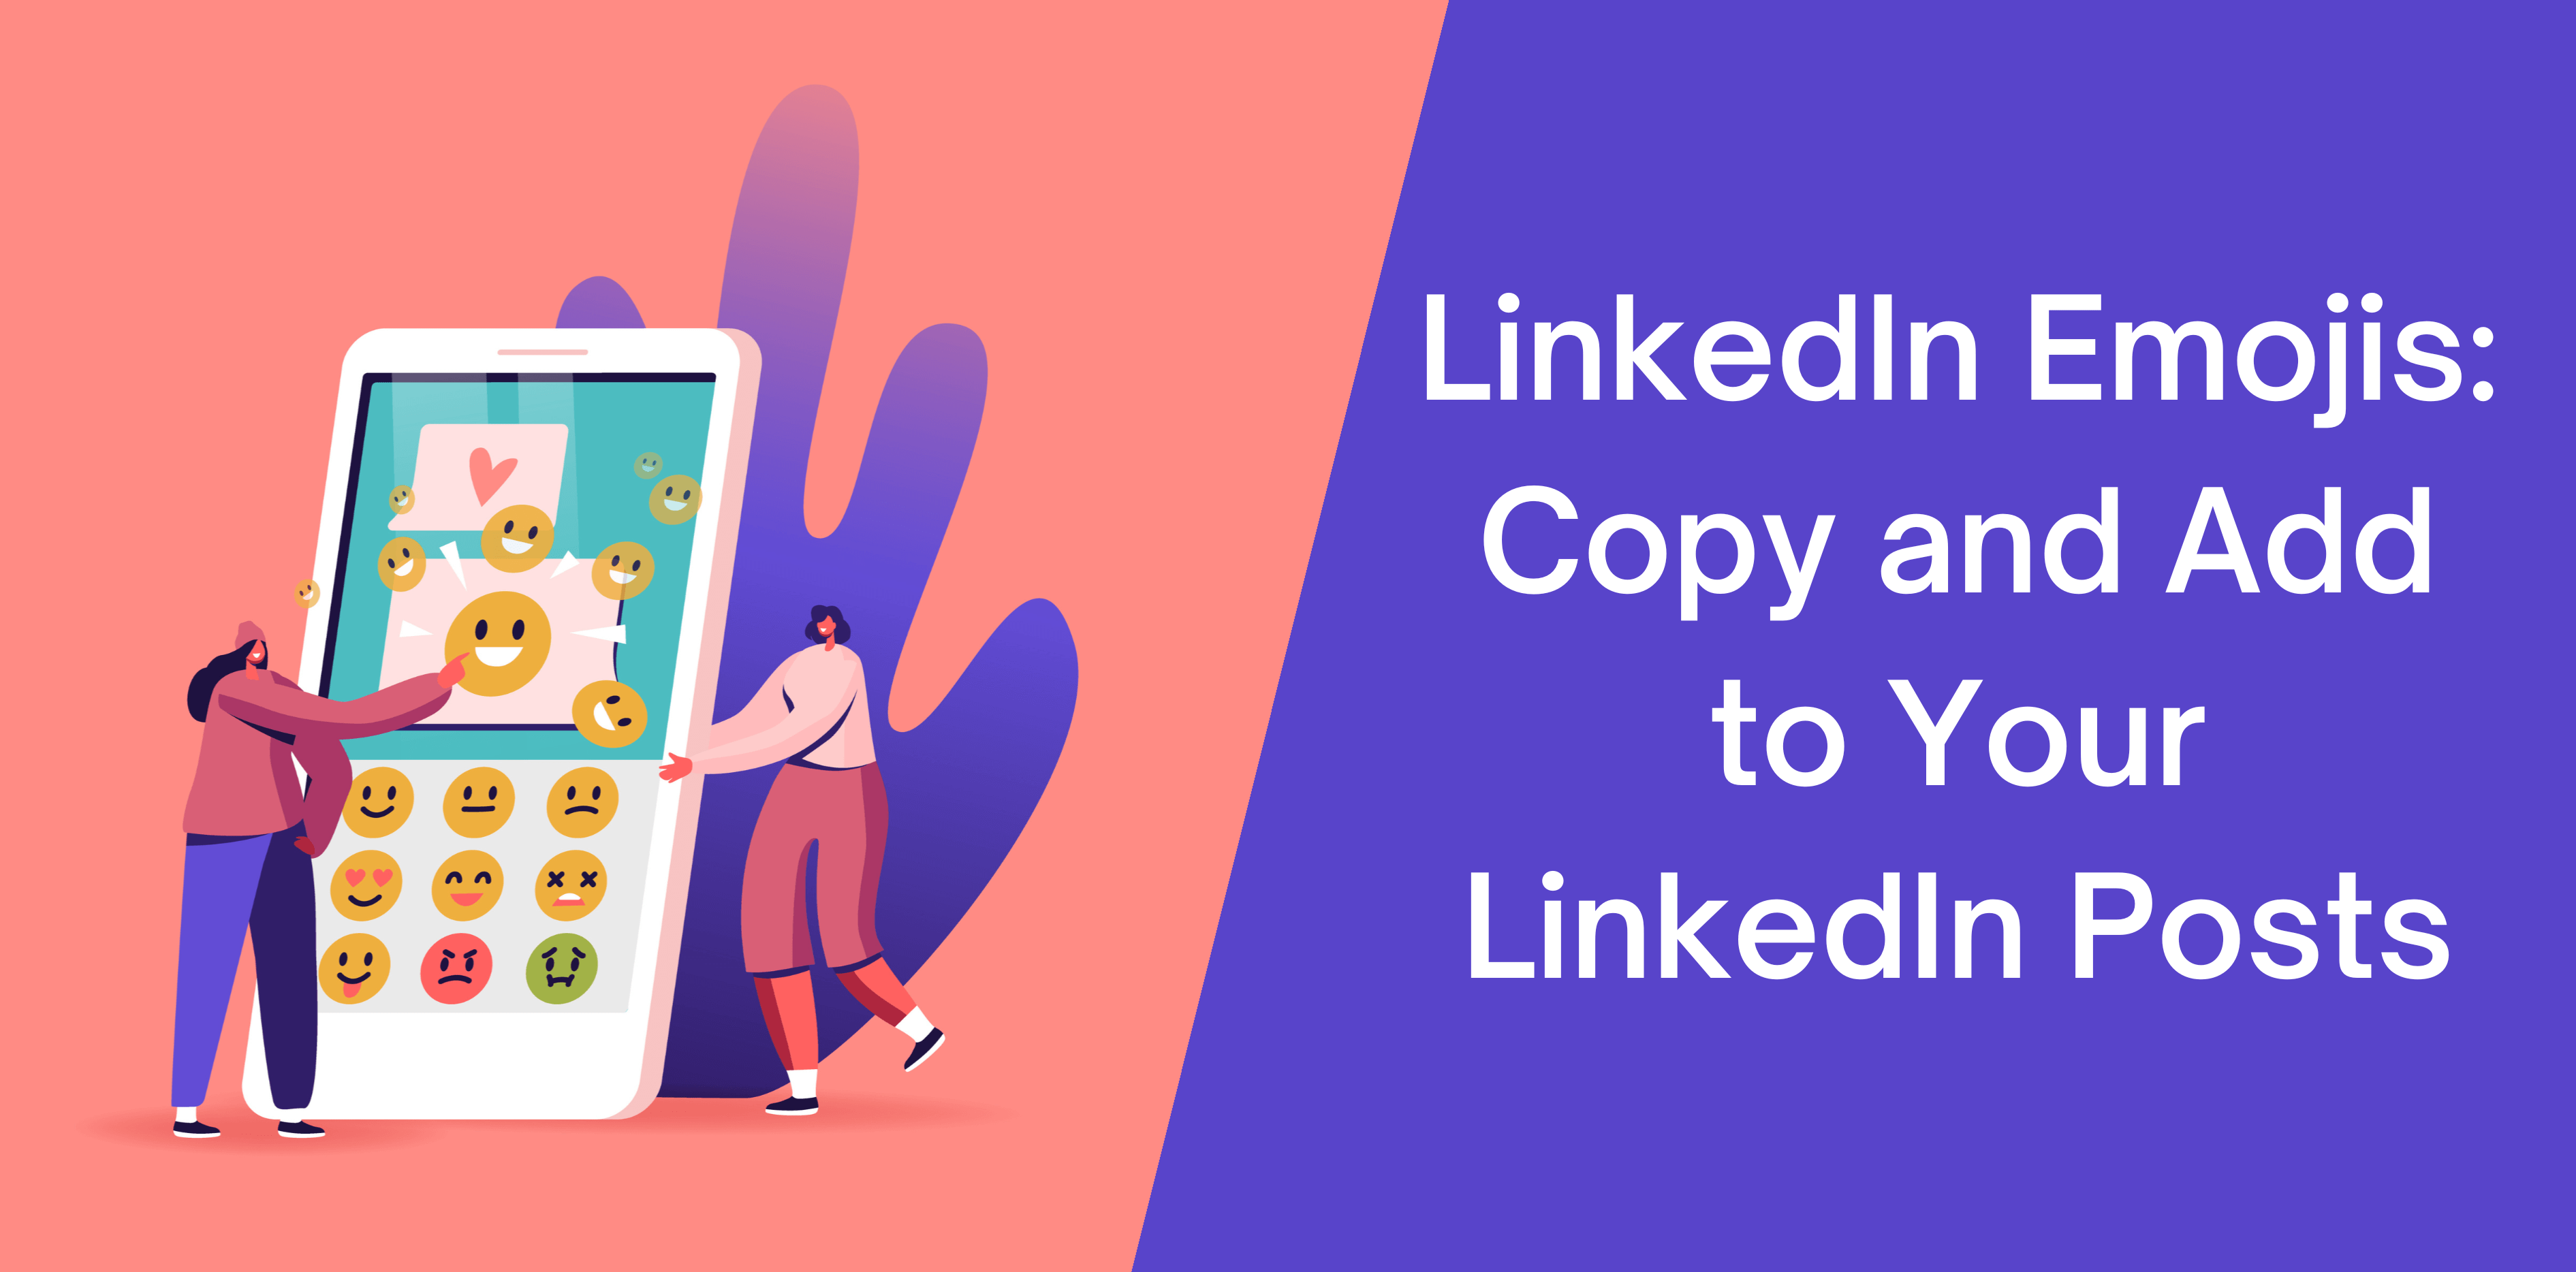 Thumbnail-LinkedIn-Emojis-Copy-and-Add-to-Your-LinkedIn-Posts